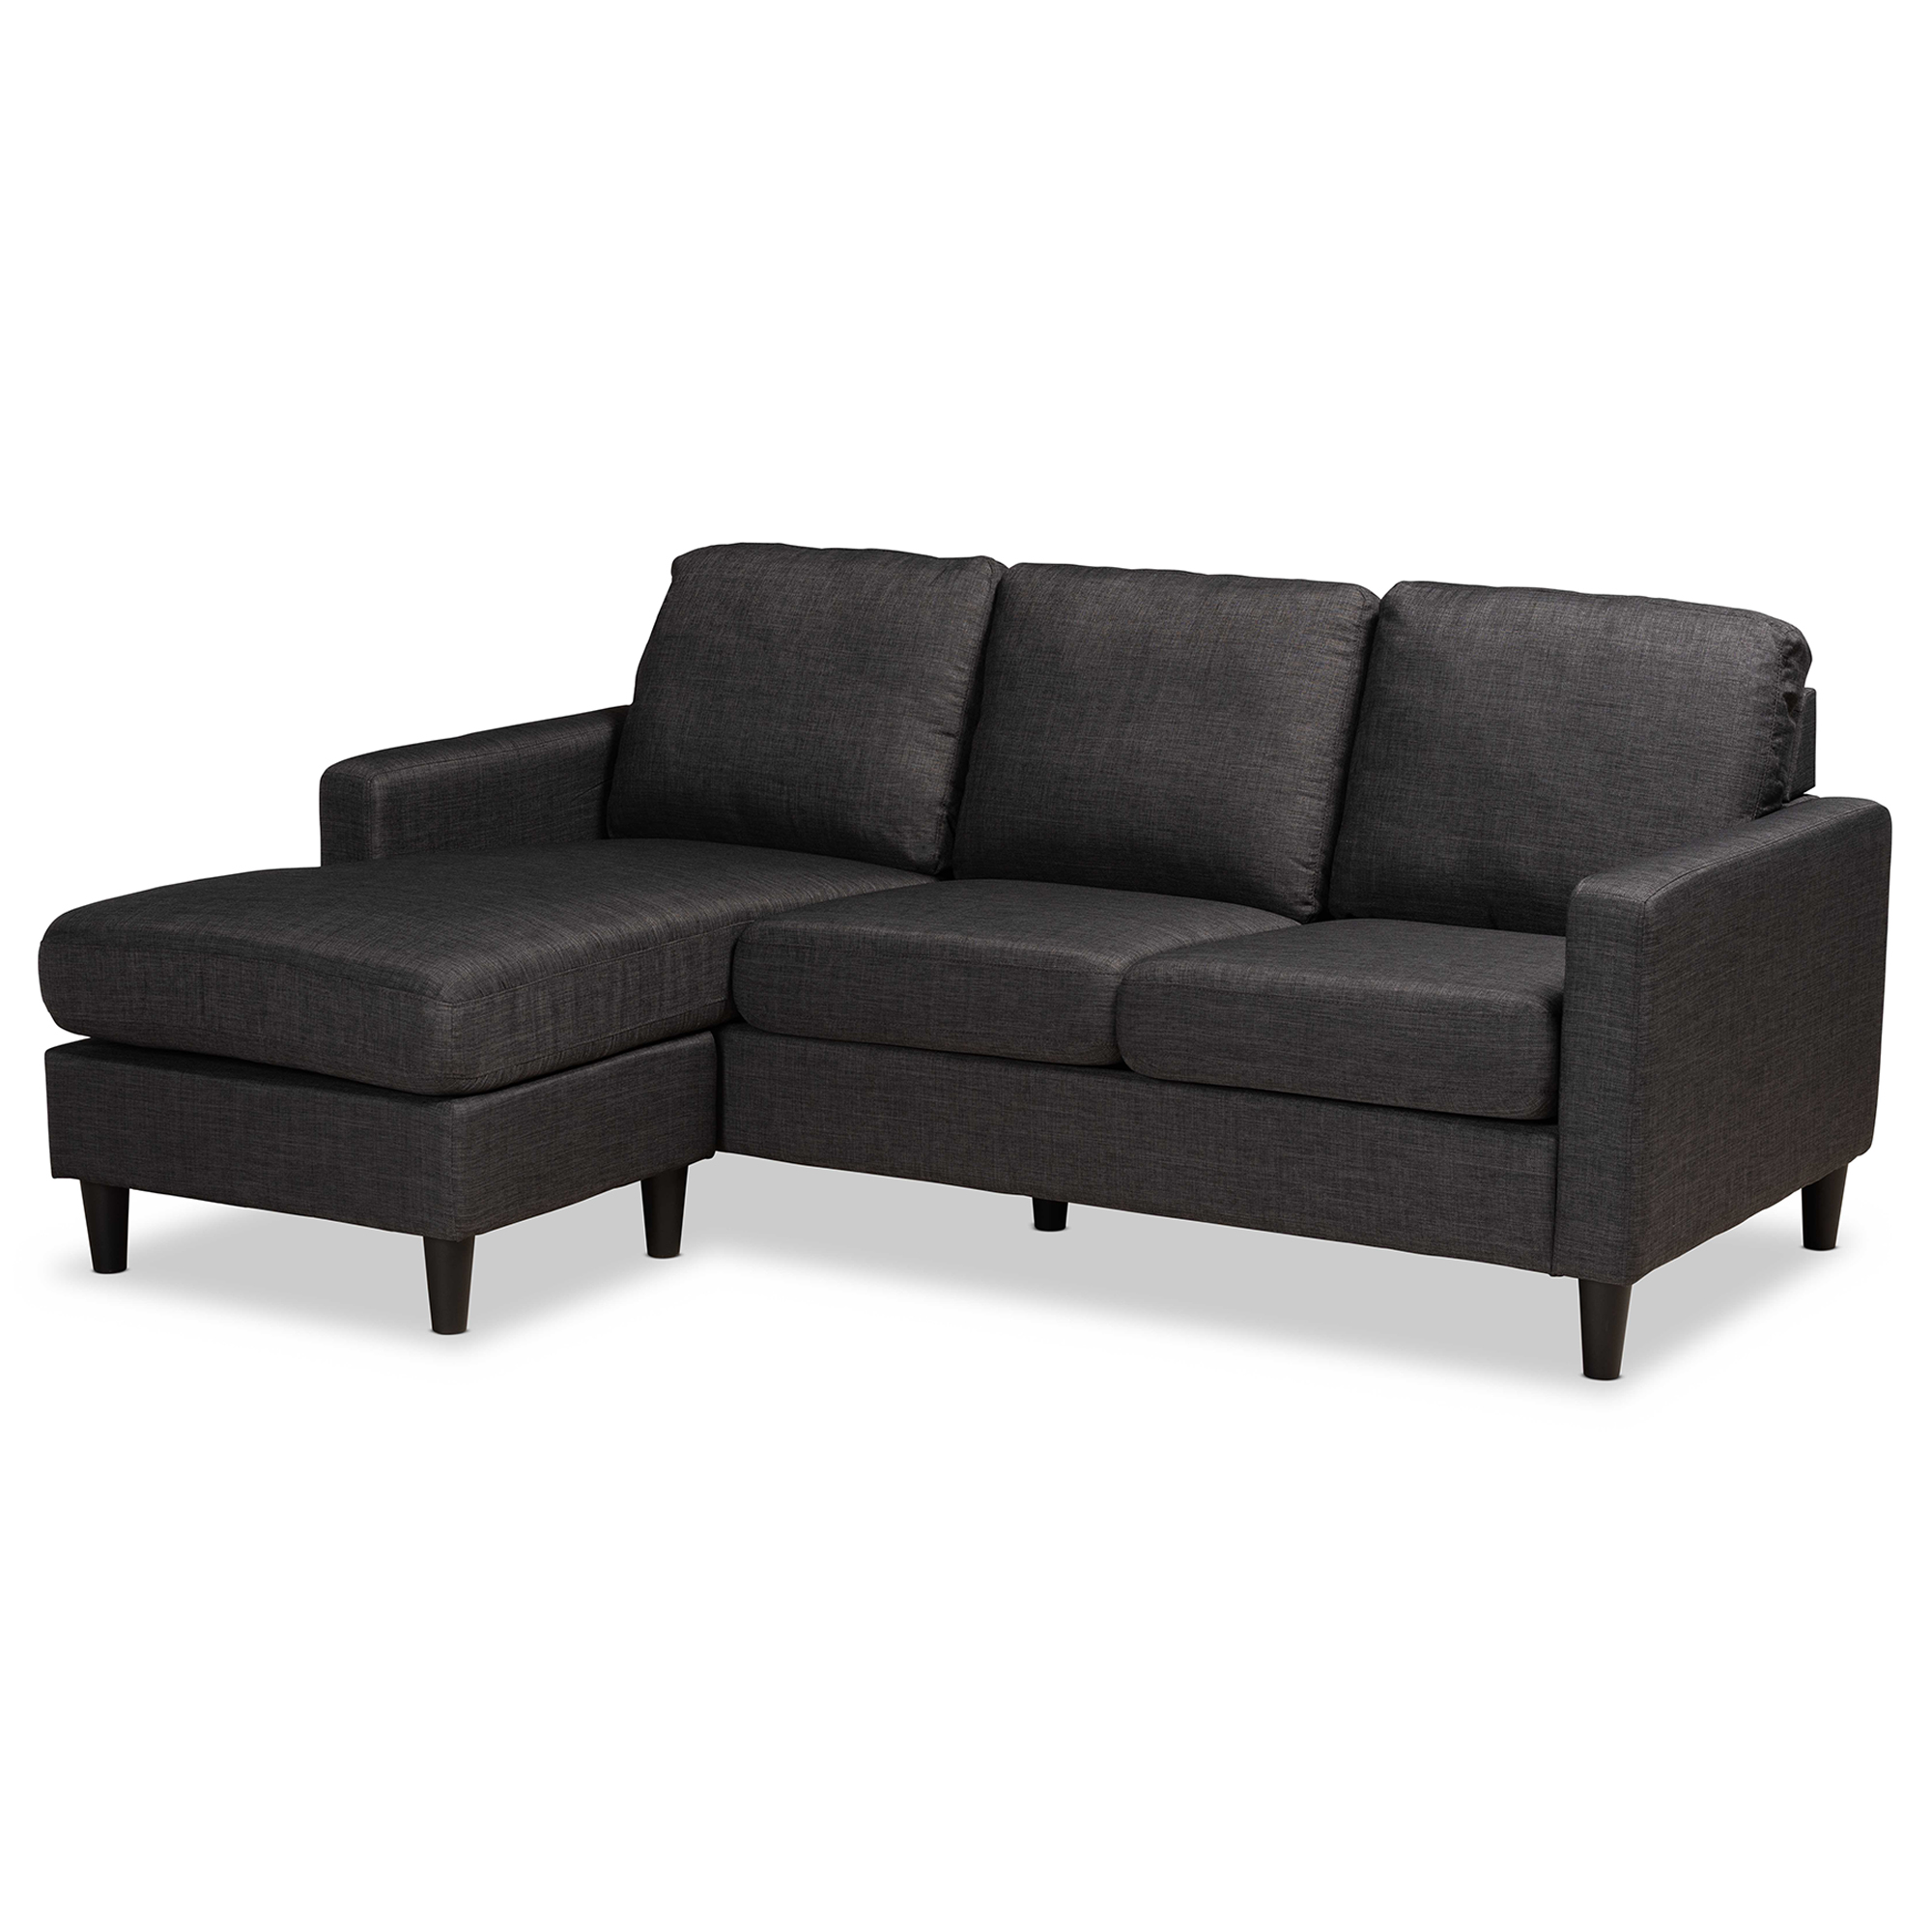 Baxton Studio Miles Modern and Contemporary Charcoal Fabric Upholstered Sectional Sofa with Left Facing Chaise